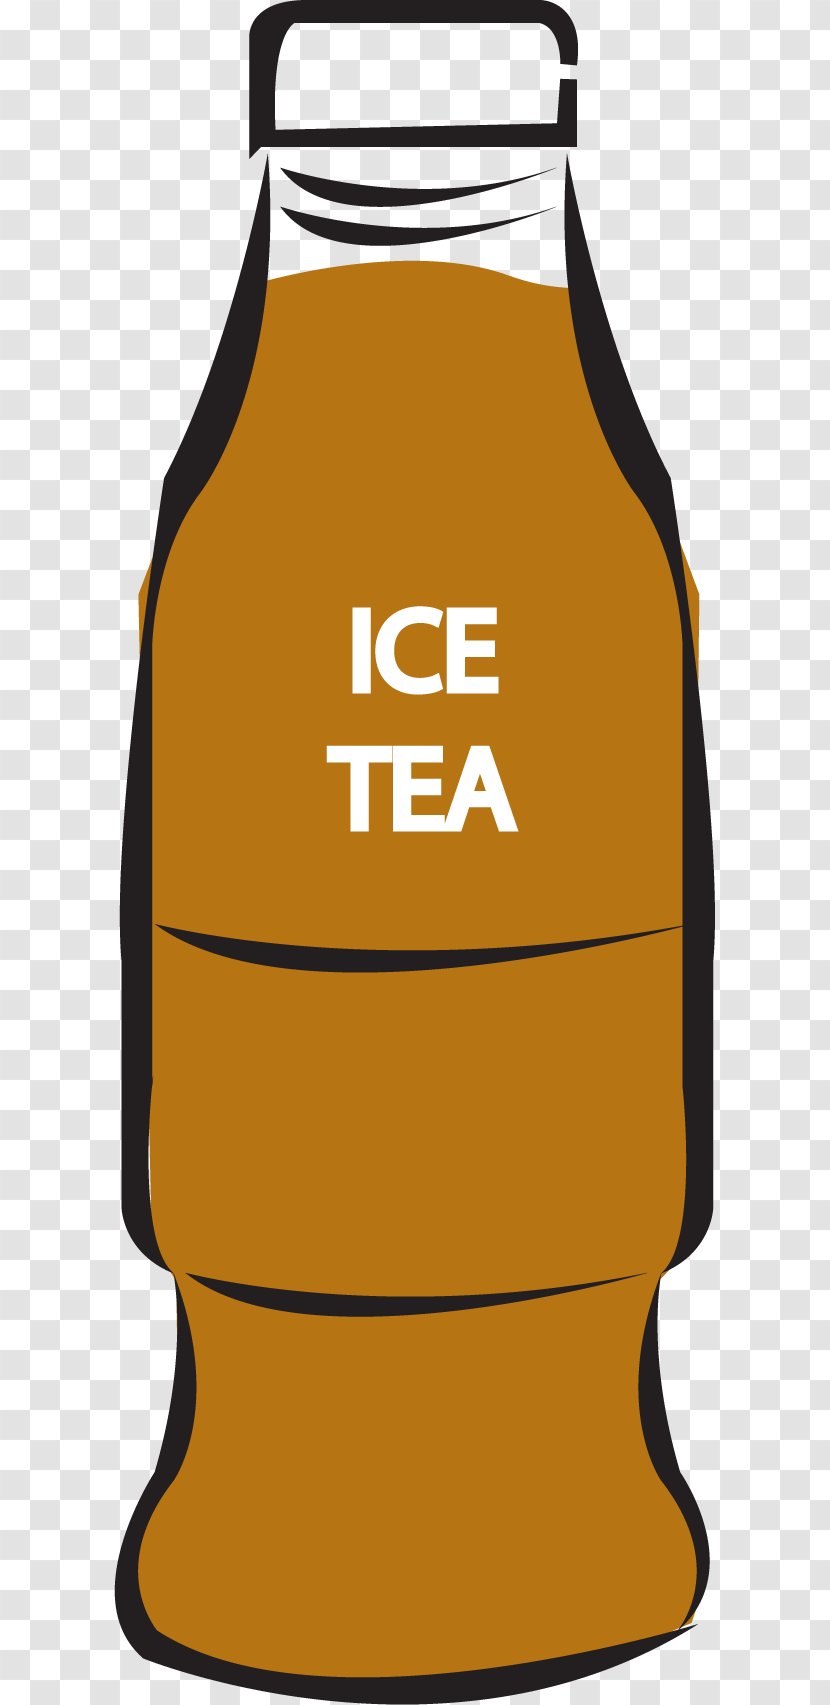 Clip Art Product Design Iced Tea - Icet - Sugary Beverages Transparent PNG